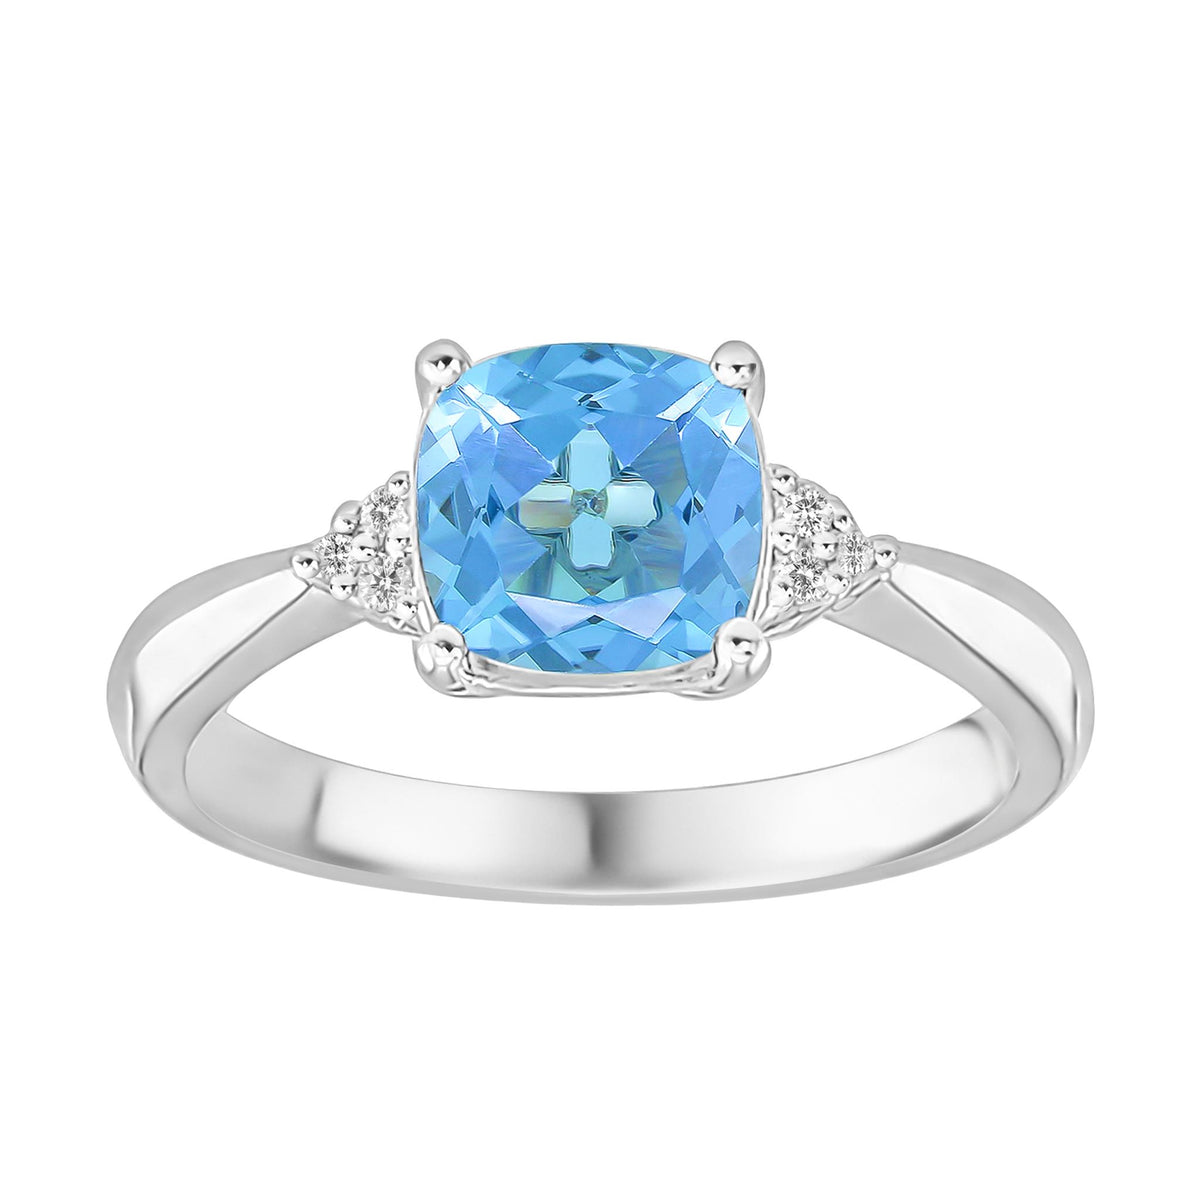 14Kt White Gold Classic Gemstone Ring With 1.93ct Blue Topaz